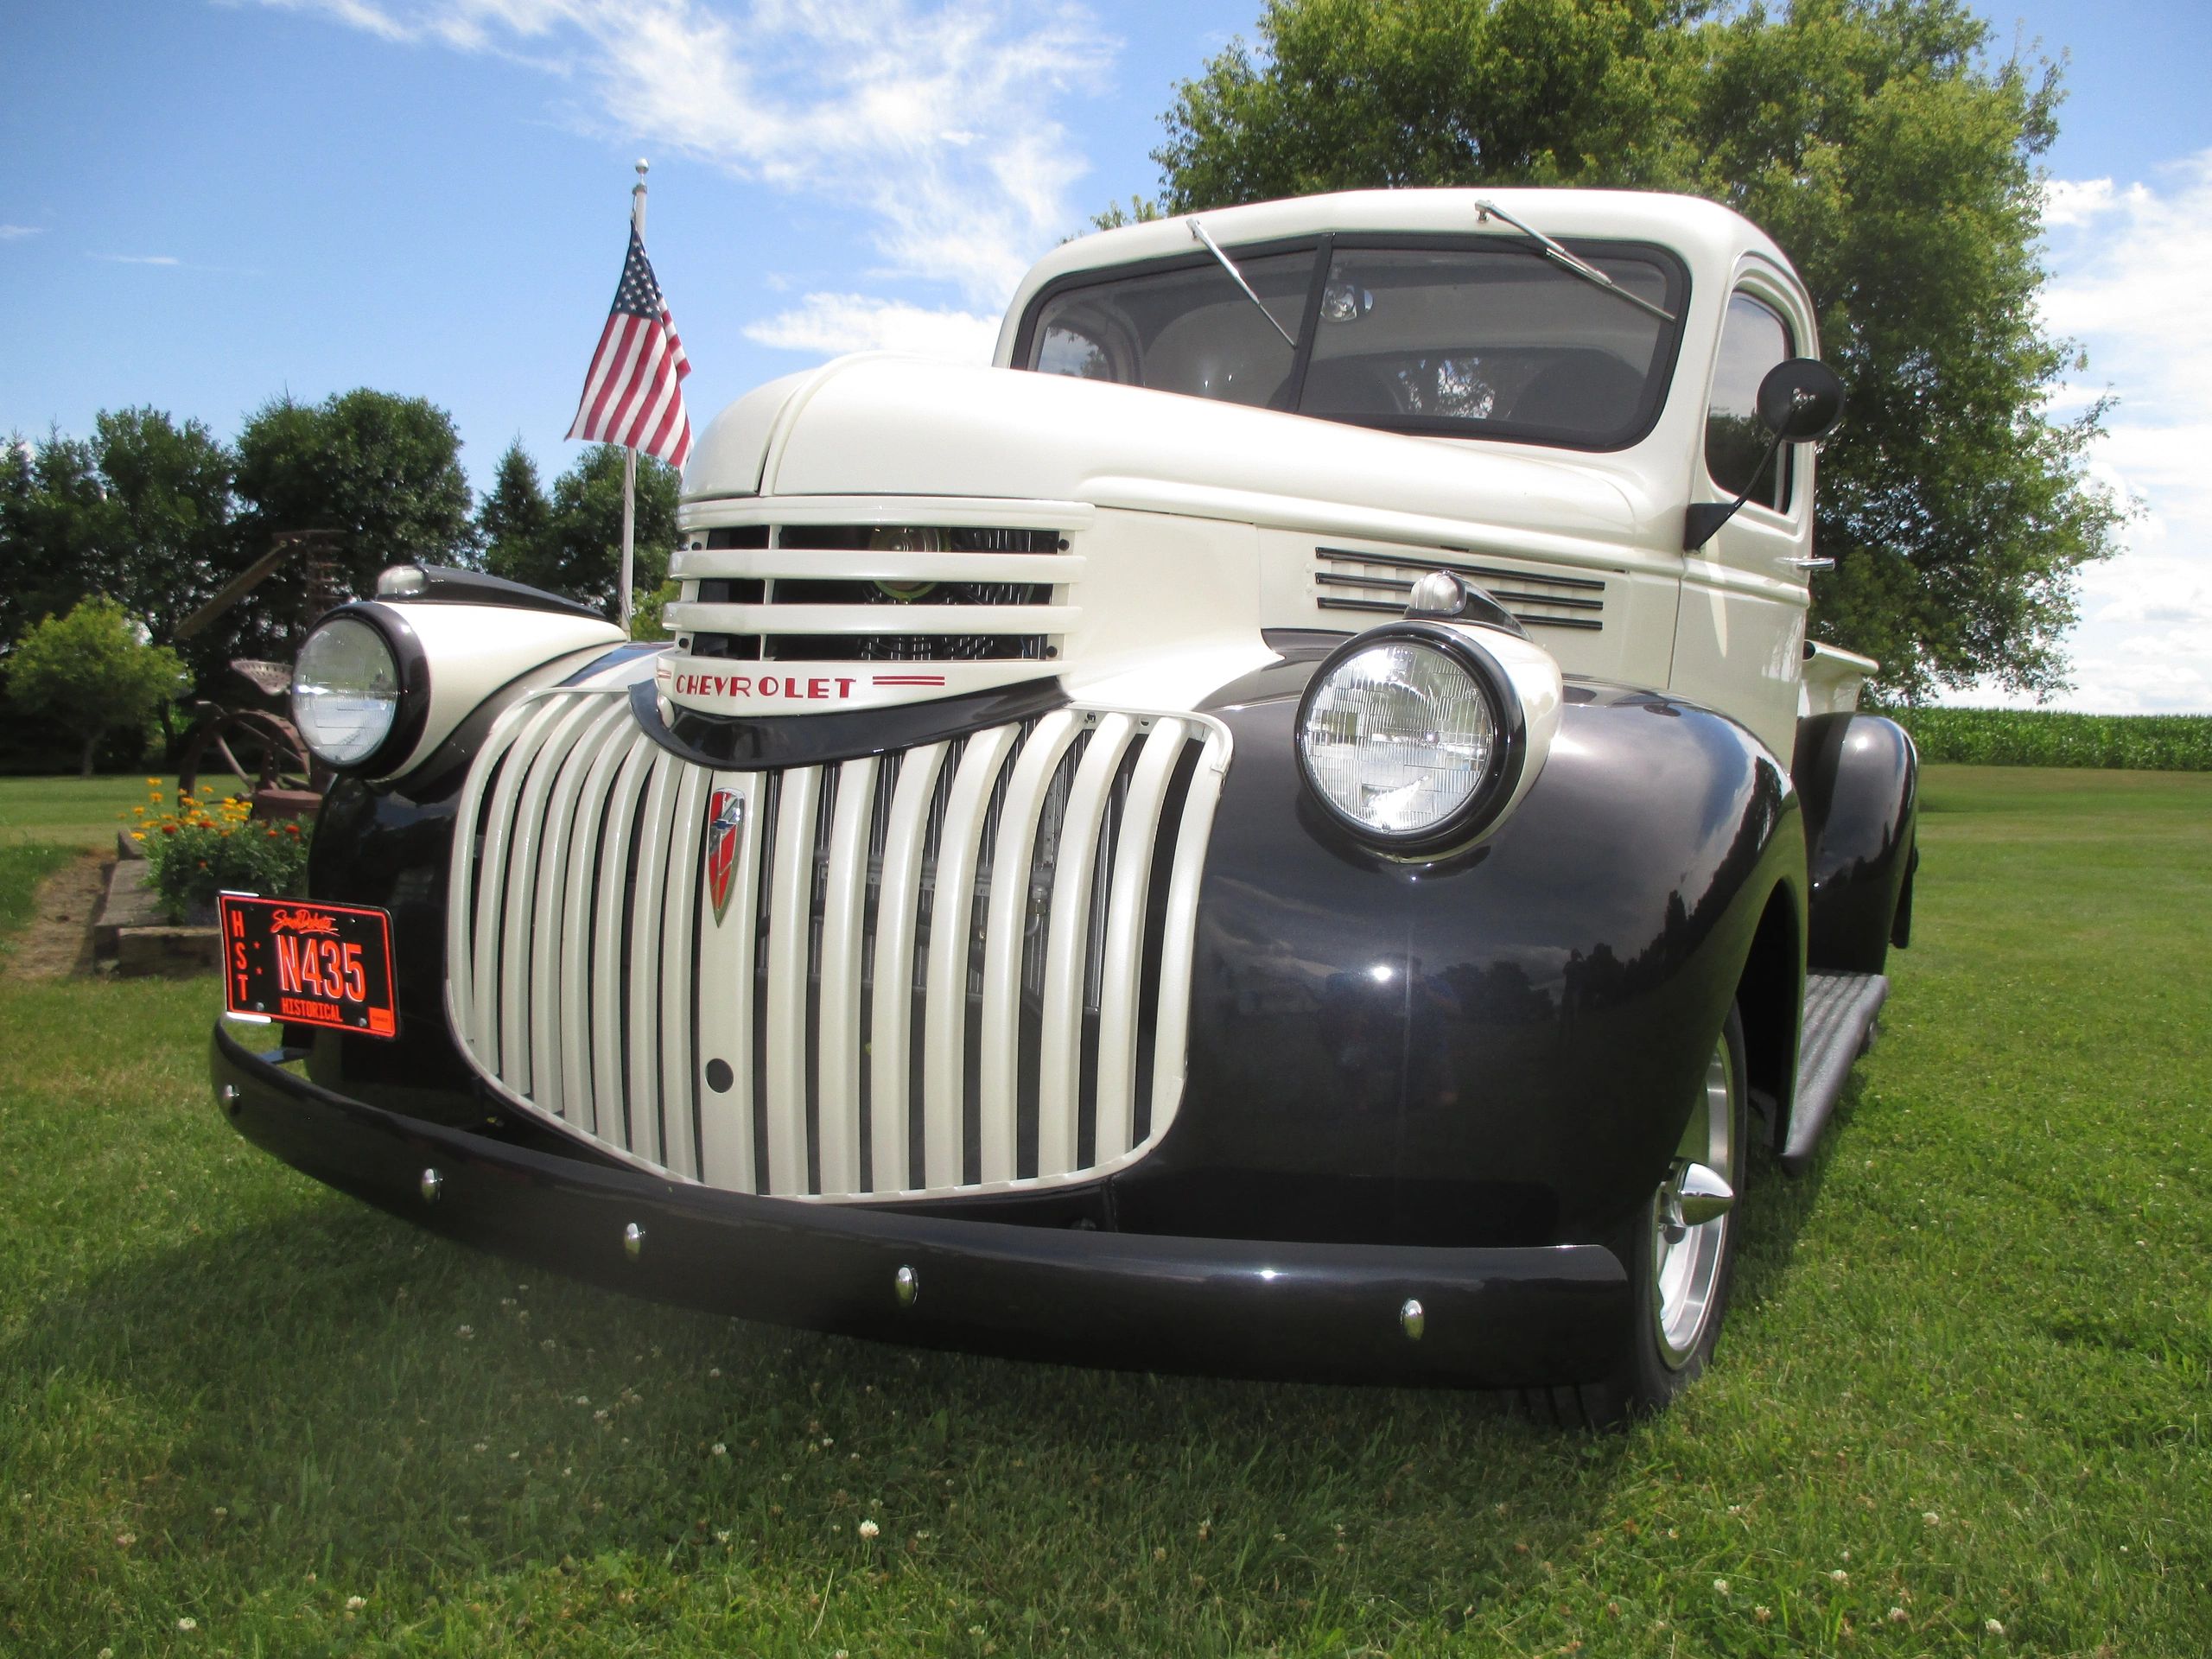 Completed frame of restoration of Guy's 41 Chevy Truck